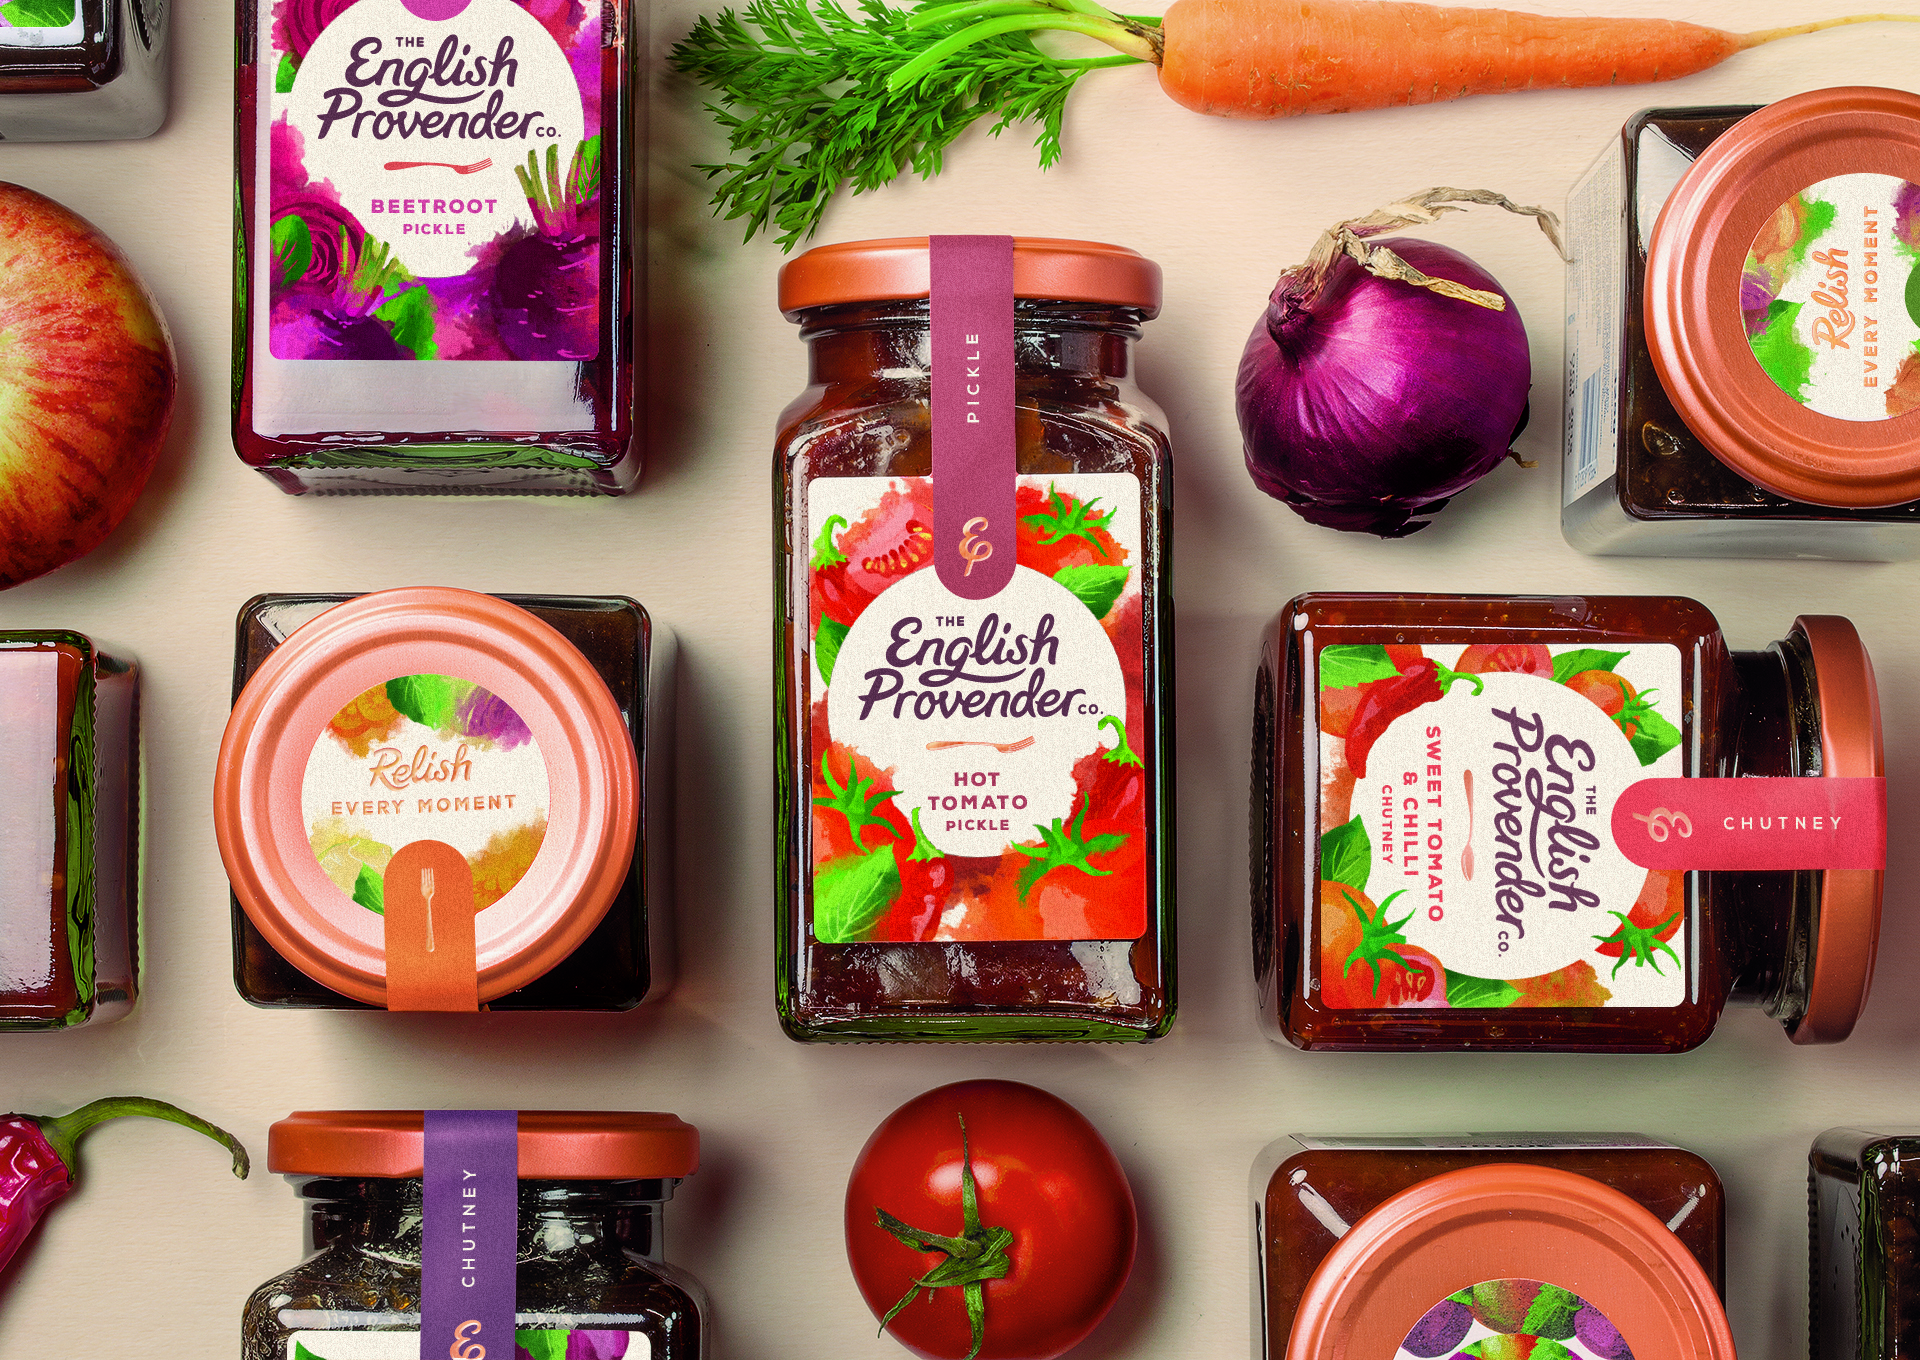 How Do We Avoid a Pickle and Create a Brand to Relish?